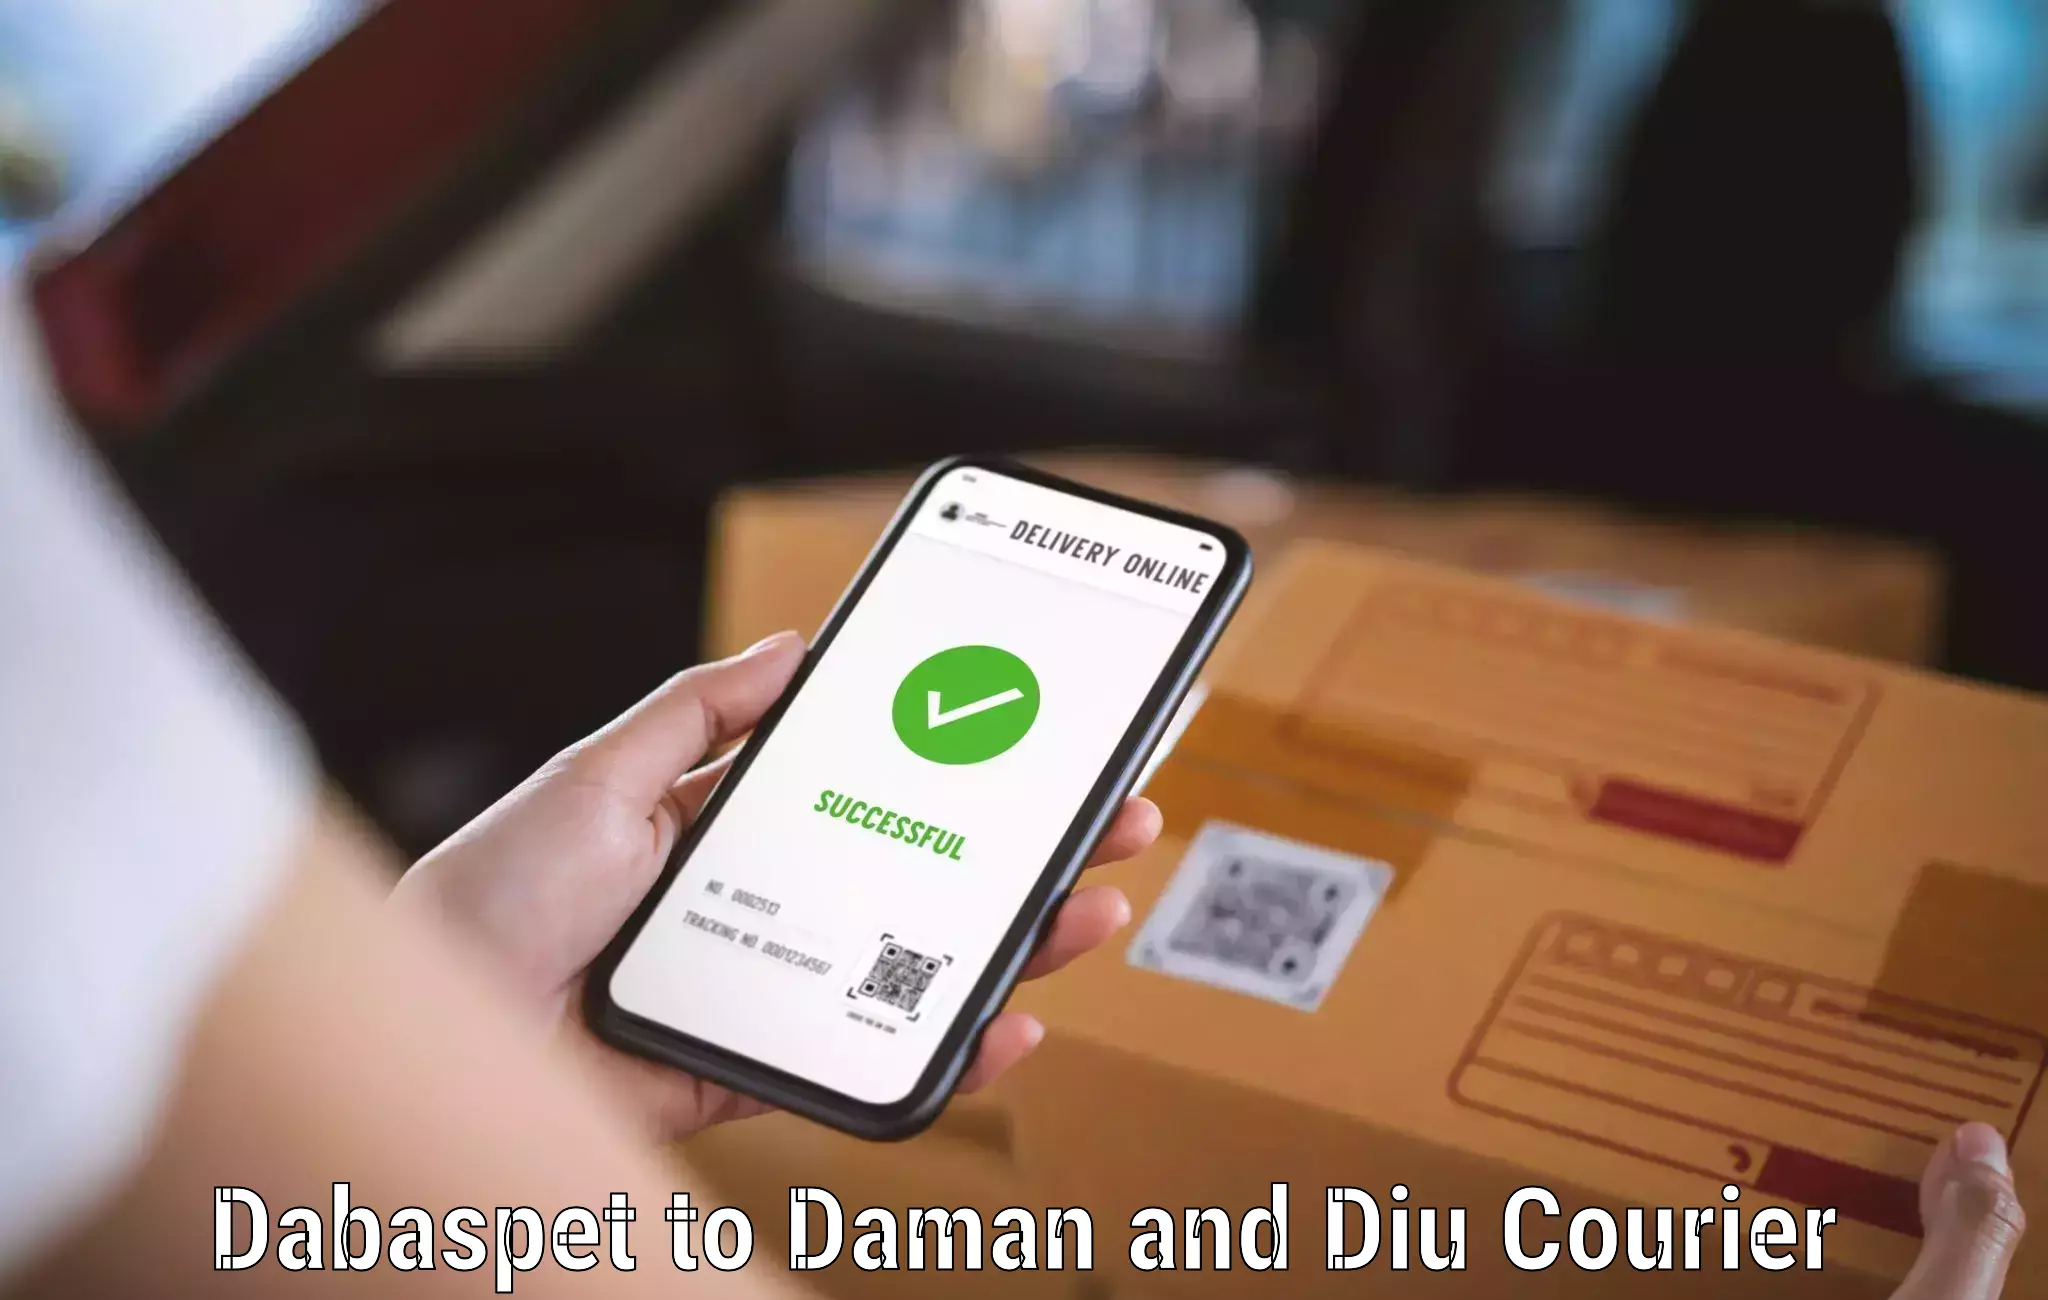 International courier networks Dabaspet to Daman and Diu